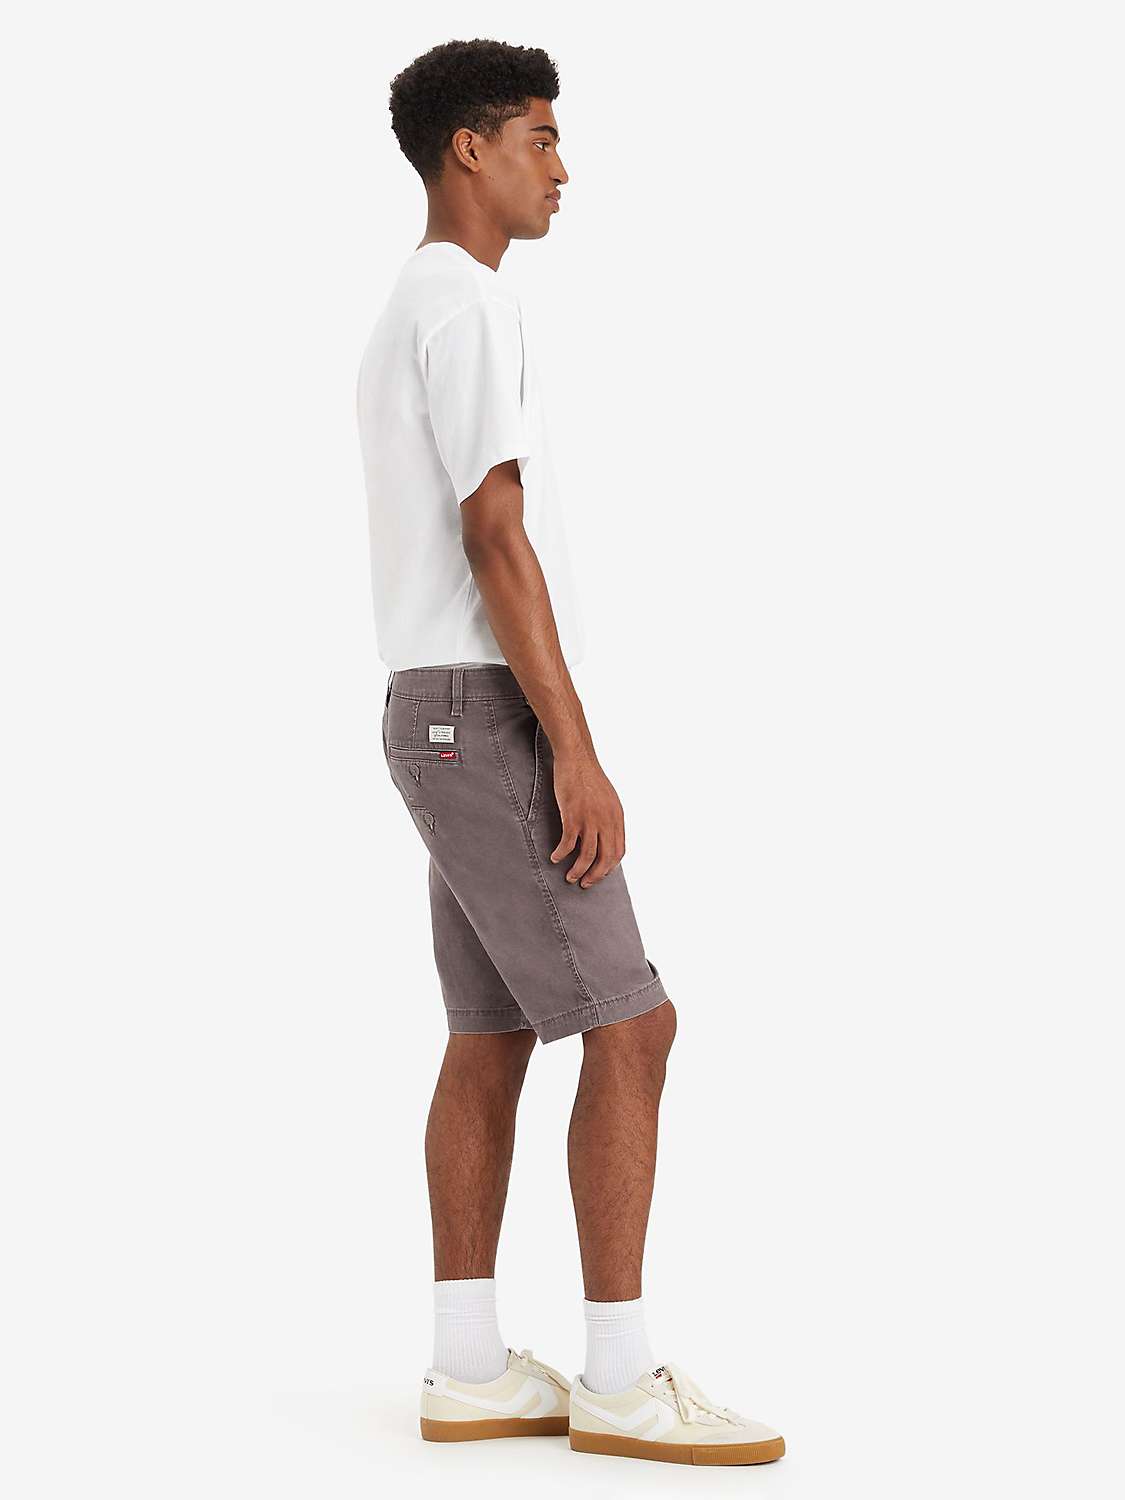 Buy Levi's XX Chino Shorts, Red Online at johnlewis.com